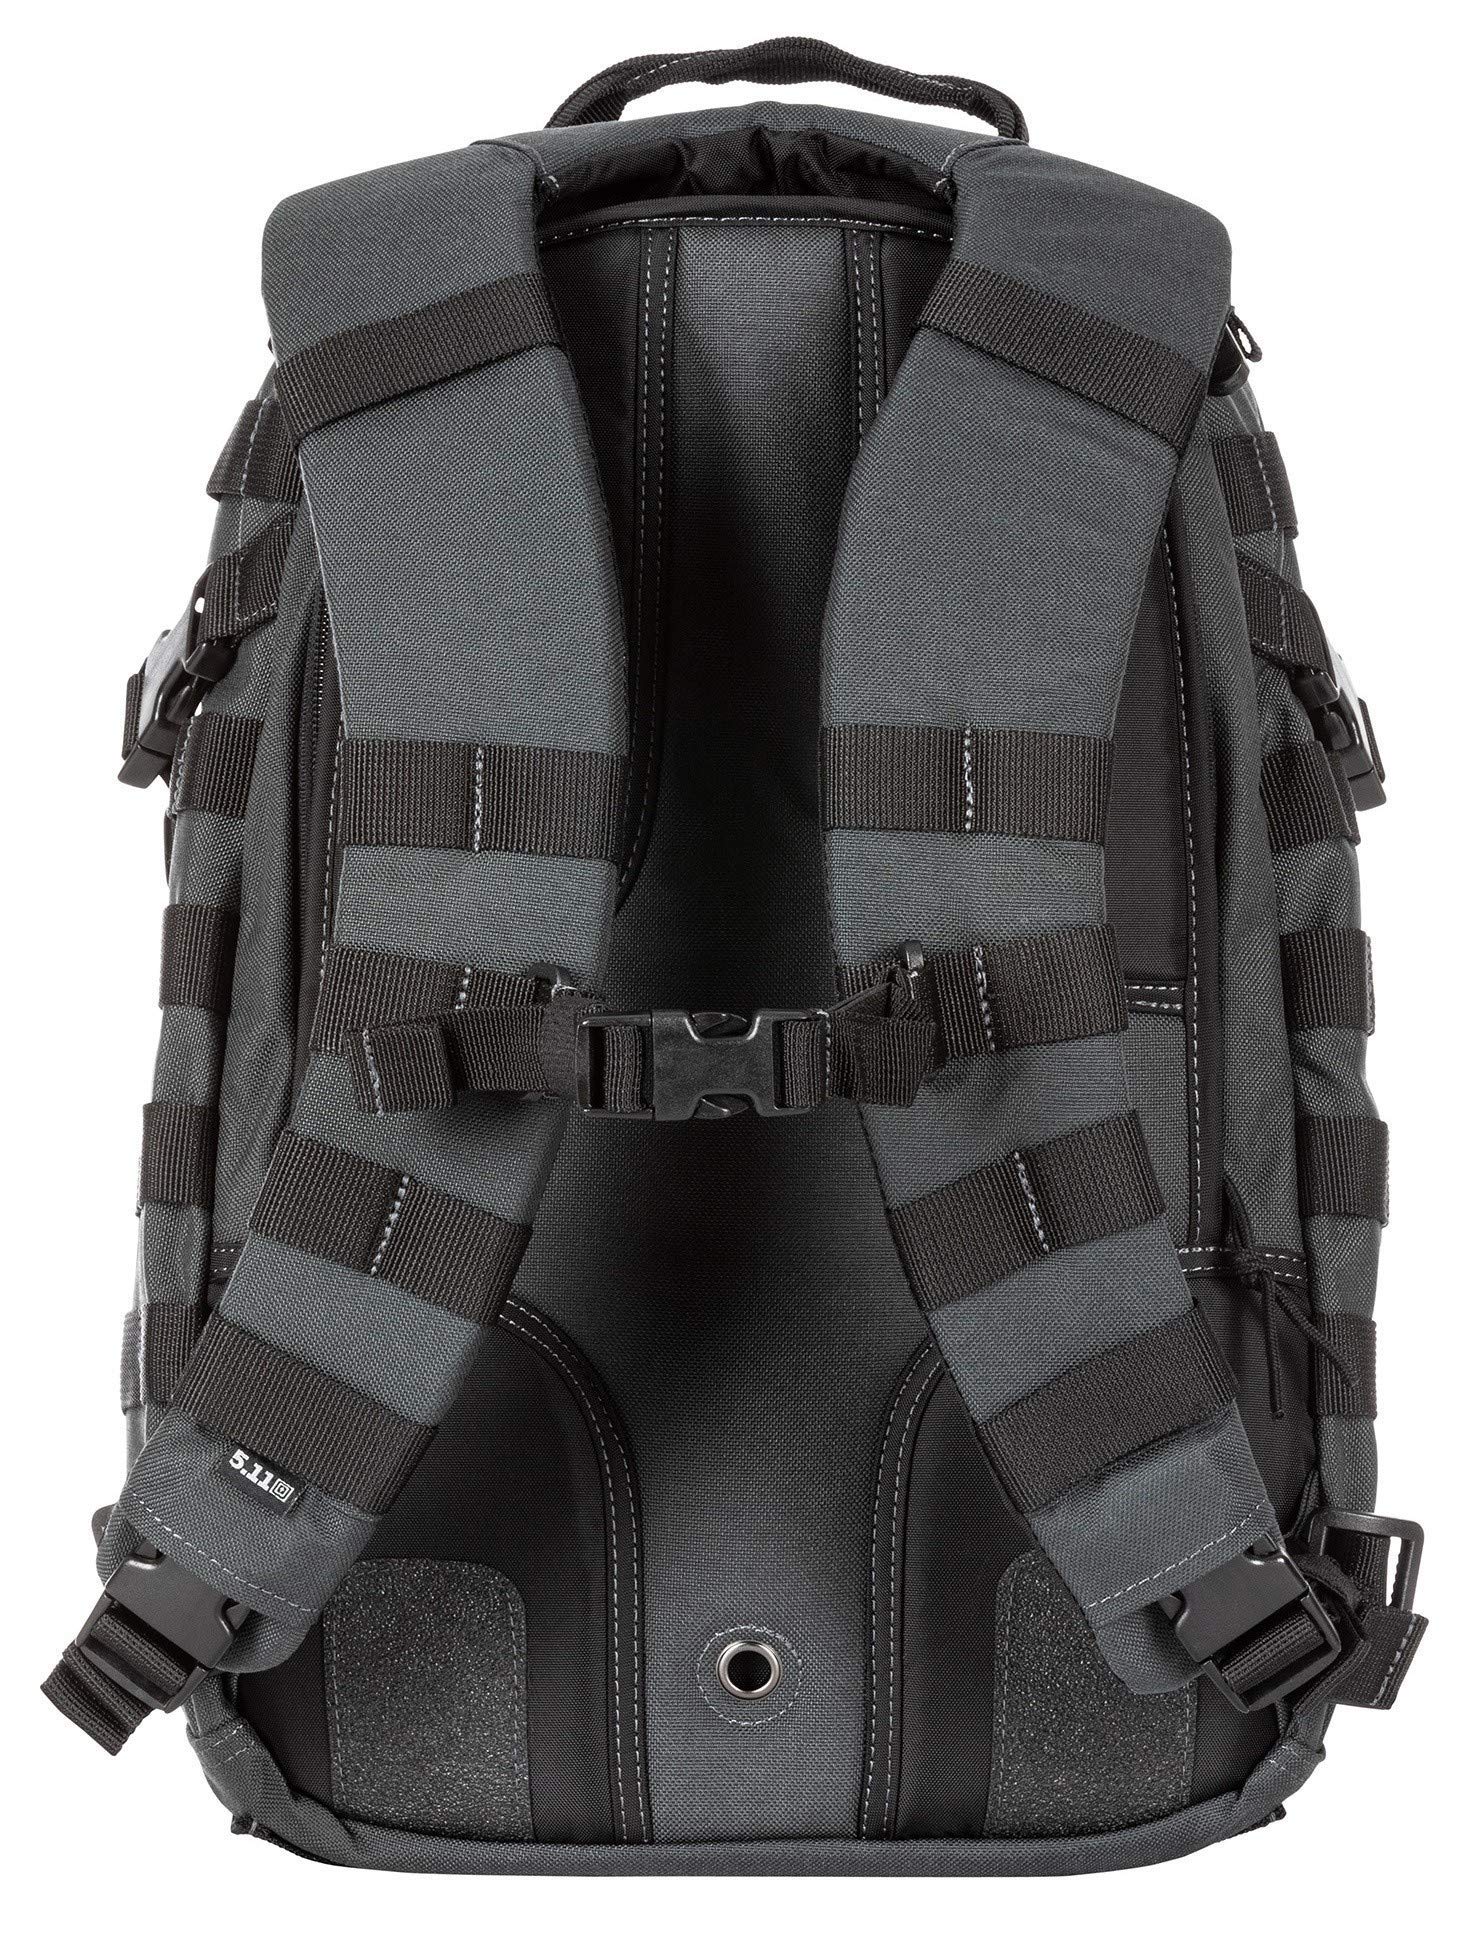 5.11 Tactical Military Backpack - RUSH12 - Molle Bag Rucksack Pack, 24 Liter Small, Style 56892